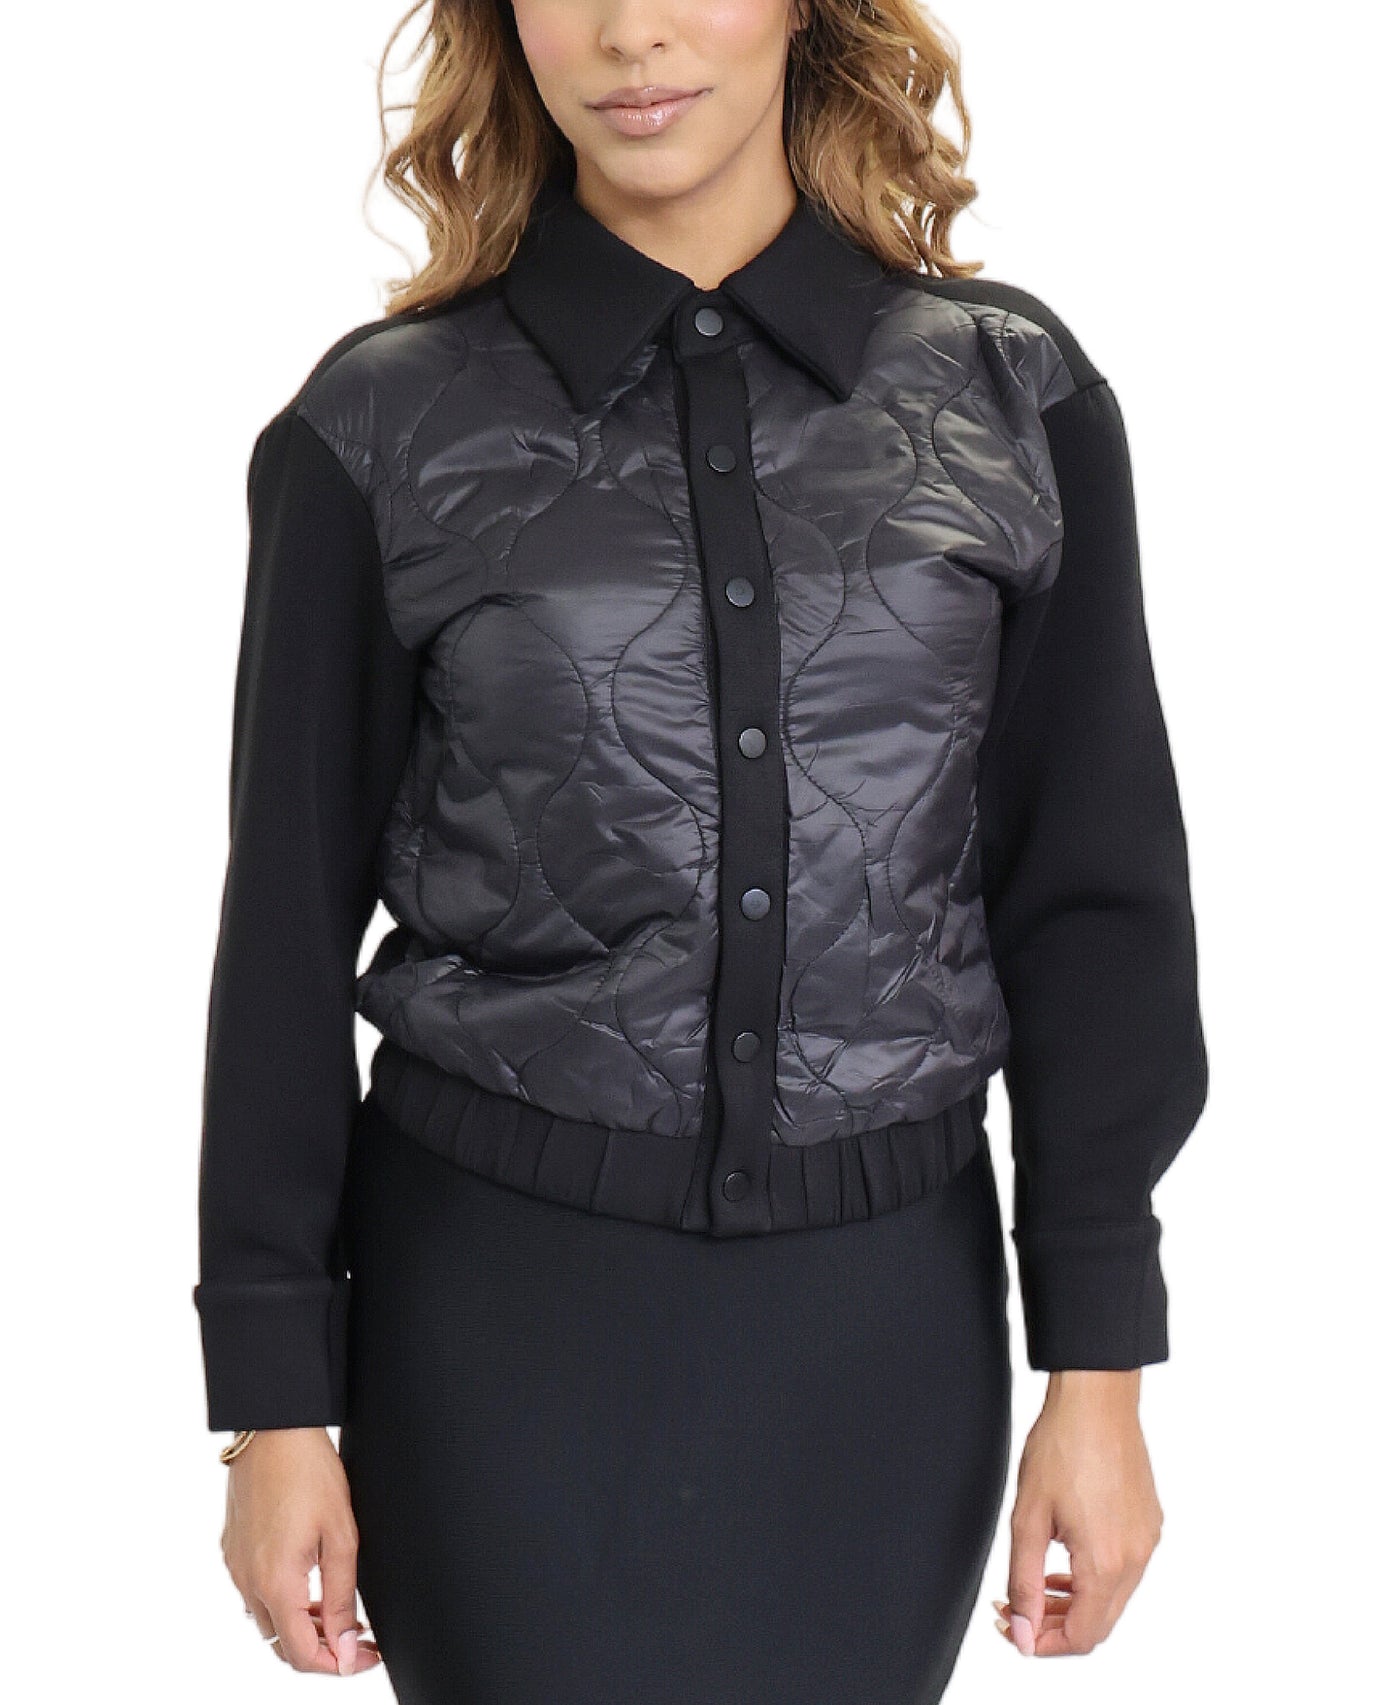 Scuba Bomber Jacket w/ Quilted Detail image 1